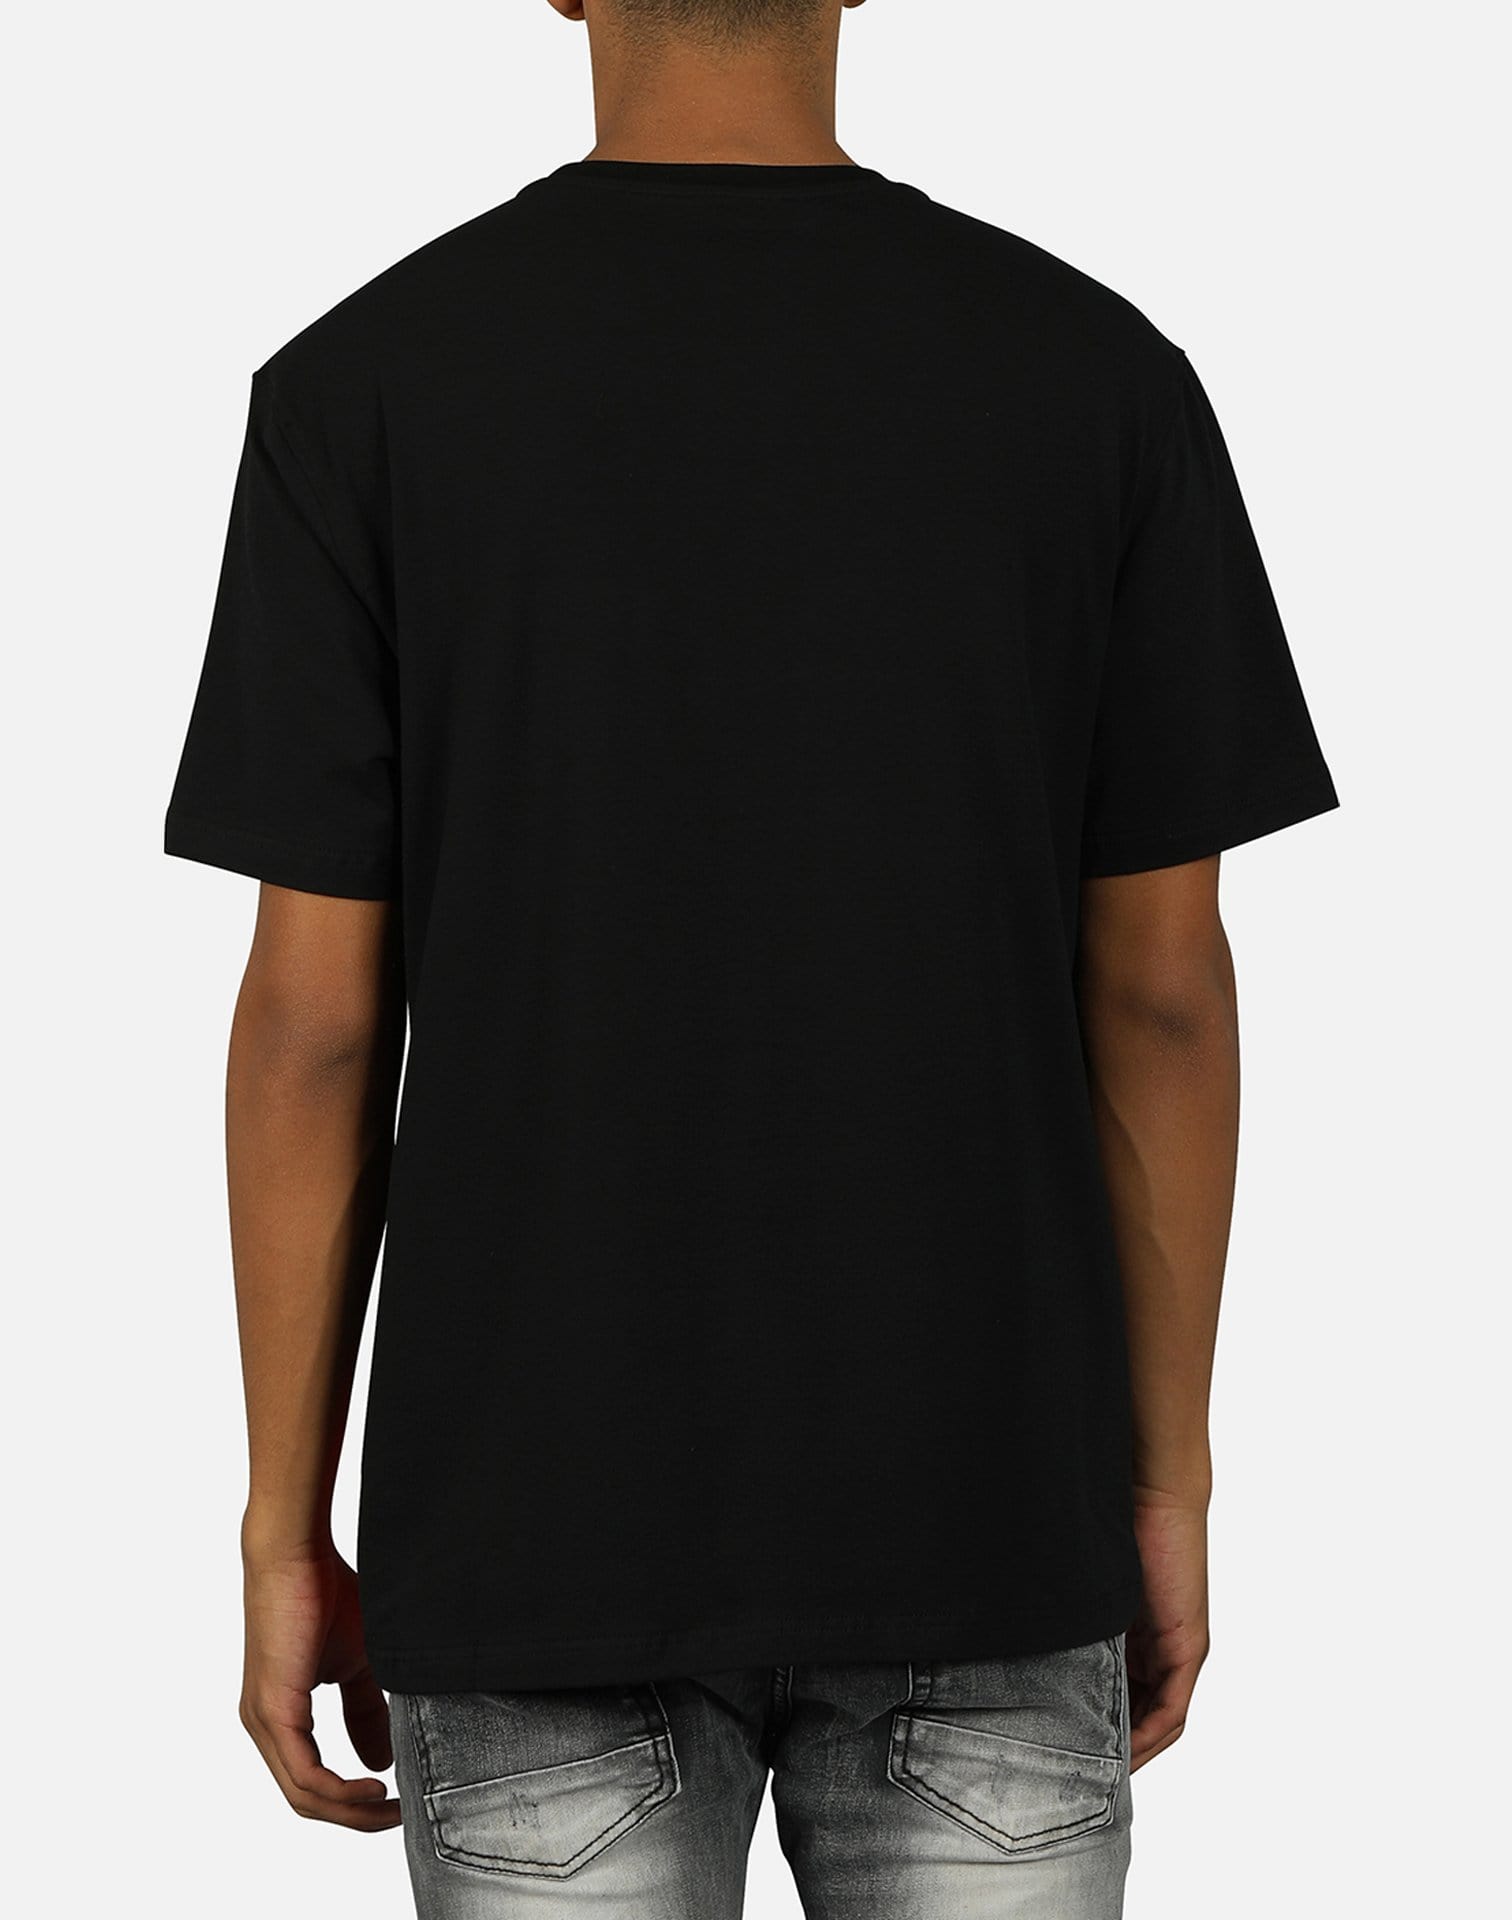 Central Mills Inc. Men's Spying Marvin Tee